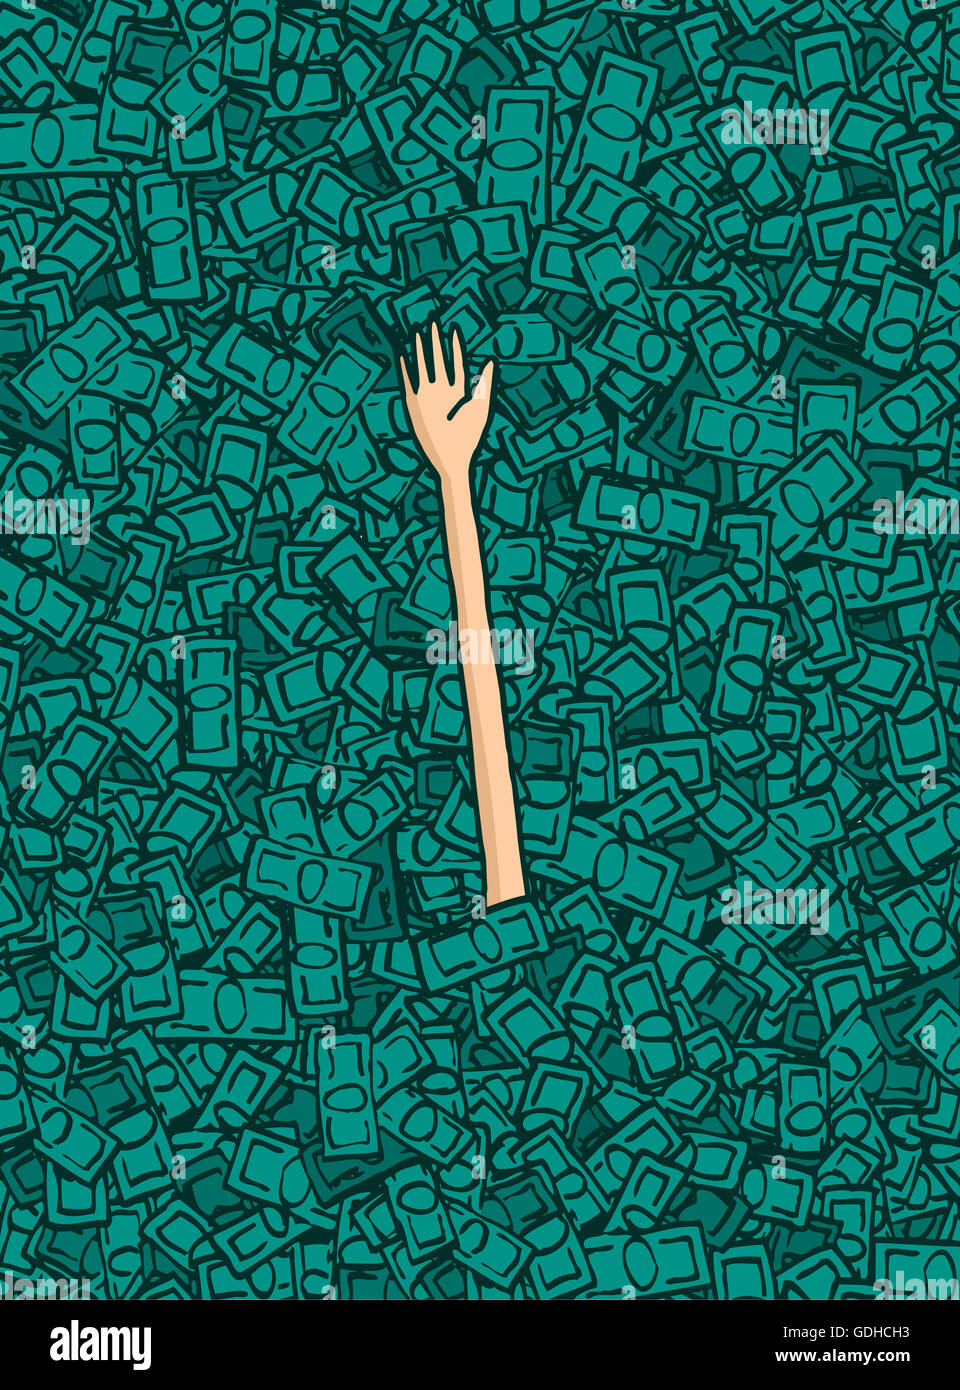 Cartoon illustration of a rich man buried in money reaching out Stock Photo